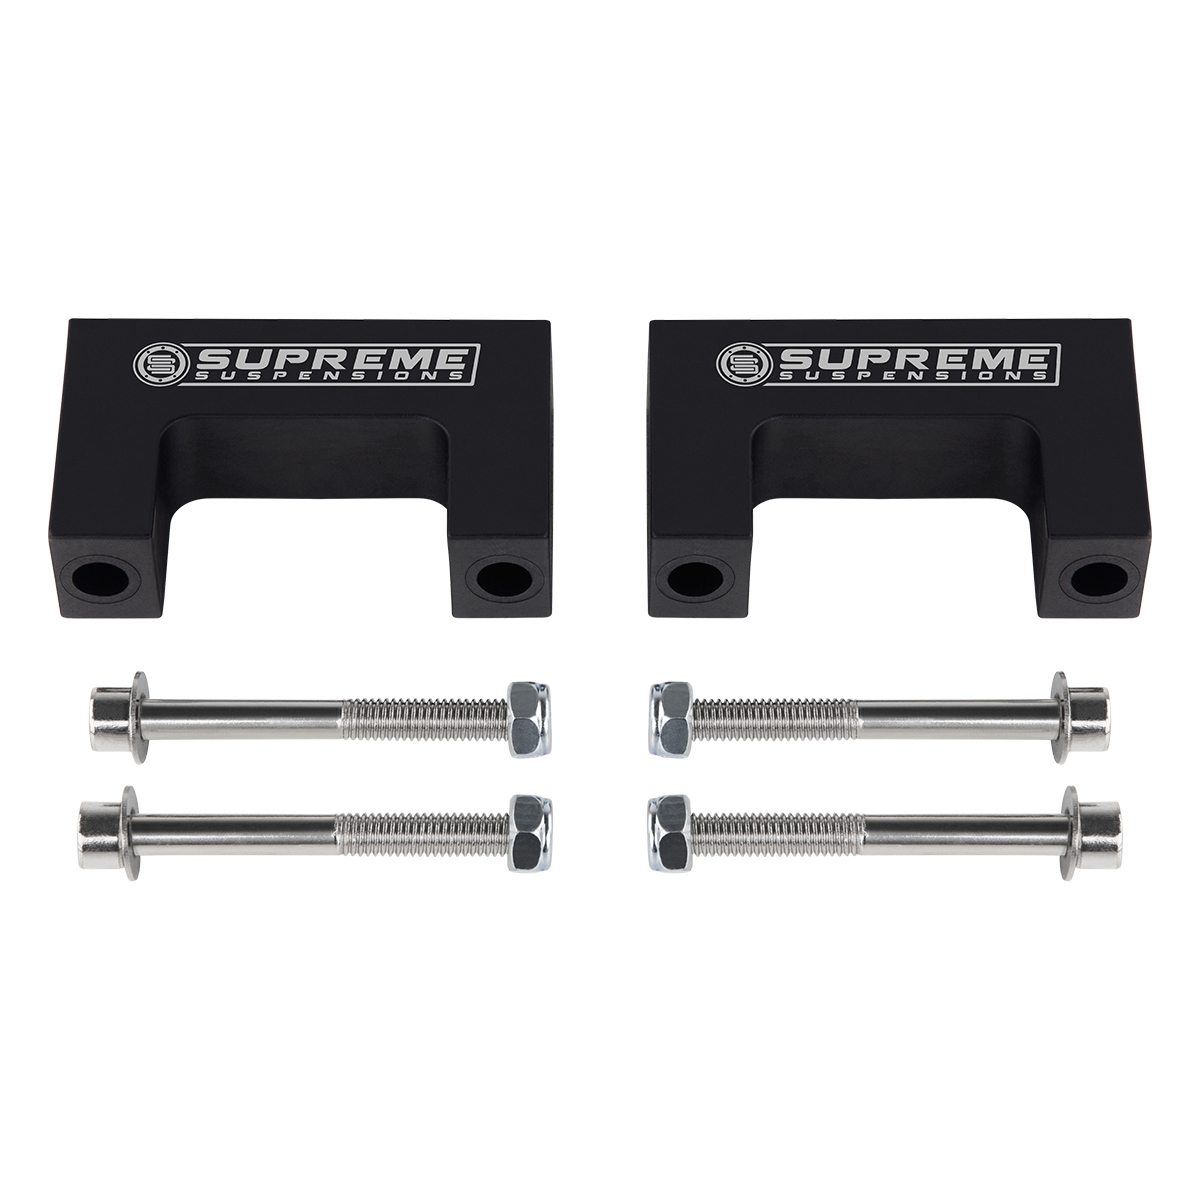 Rear Bowtie Style Shock Extenders For 2 Lifted Buick Models 2.75 inch Wide Mounts